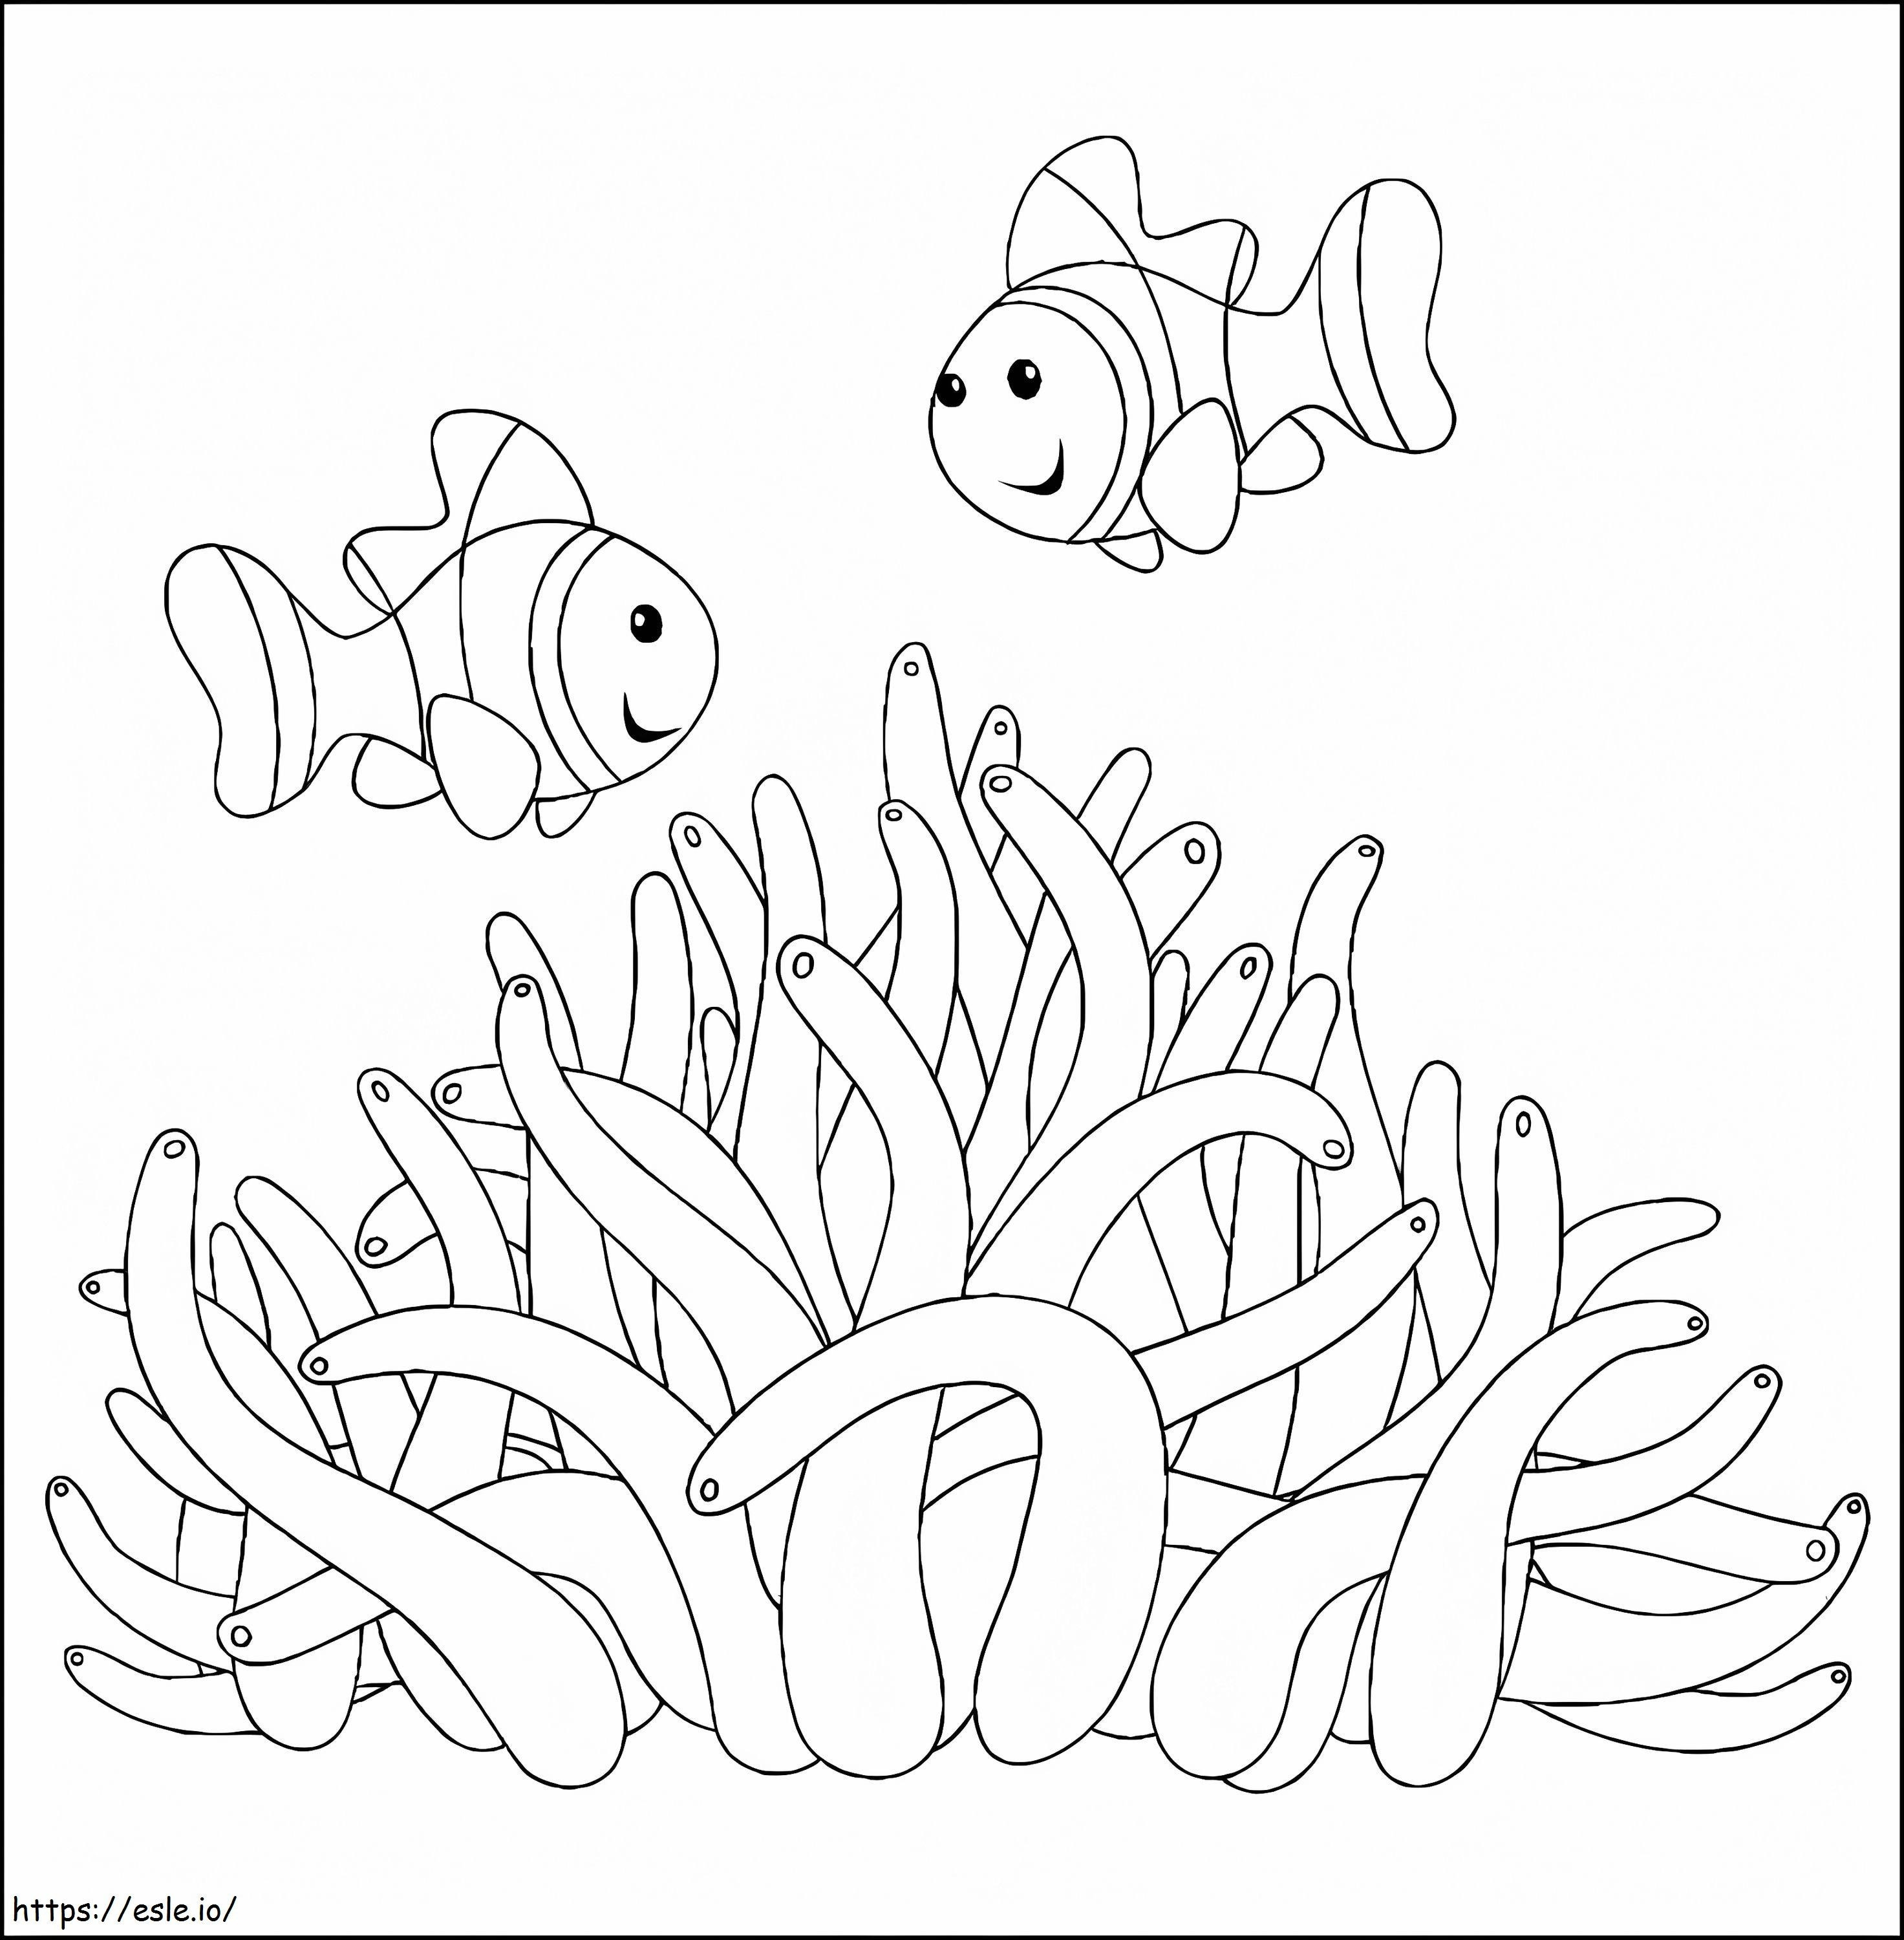 Sea Anemone 4 coloring page